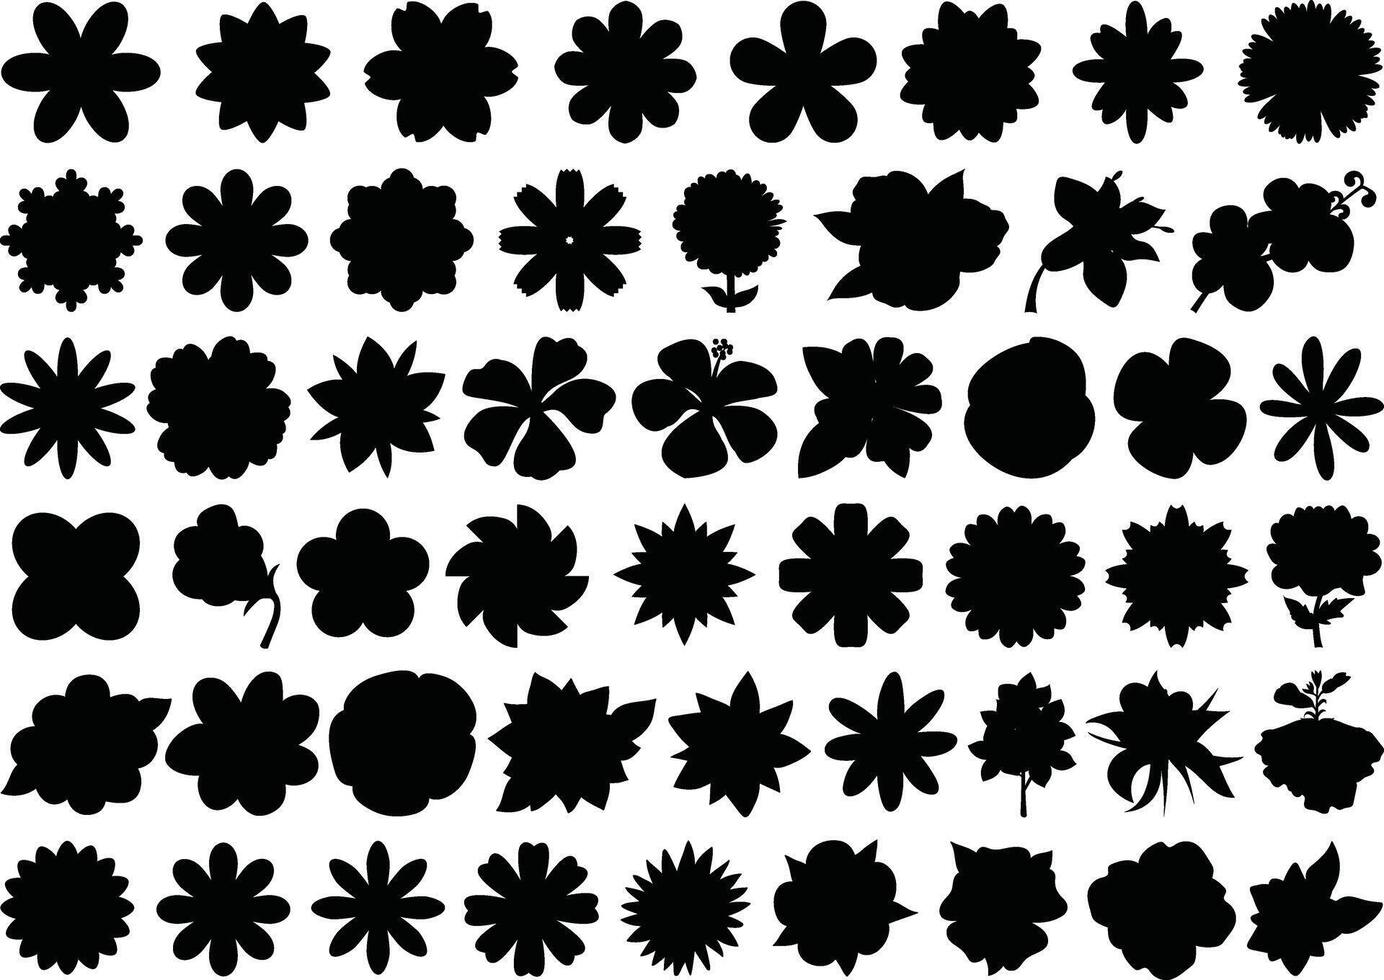 Flat flowers silhouette on white background vector